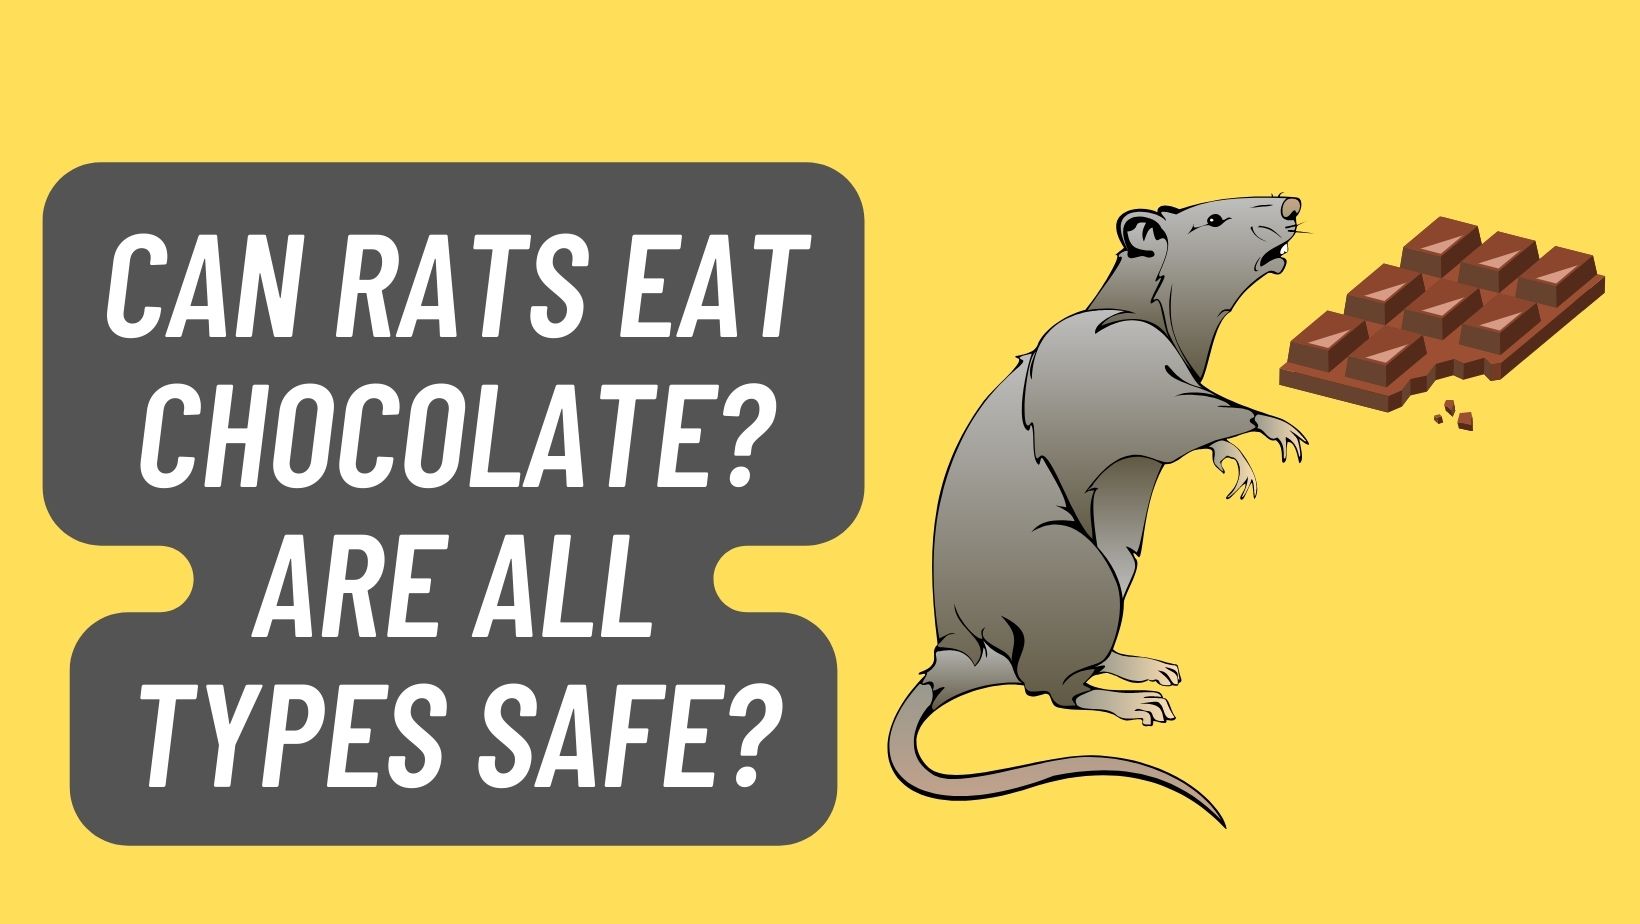 Can Rats Eat Chocolate? Are ALL TYPES SAFE?